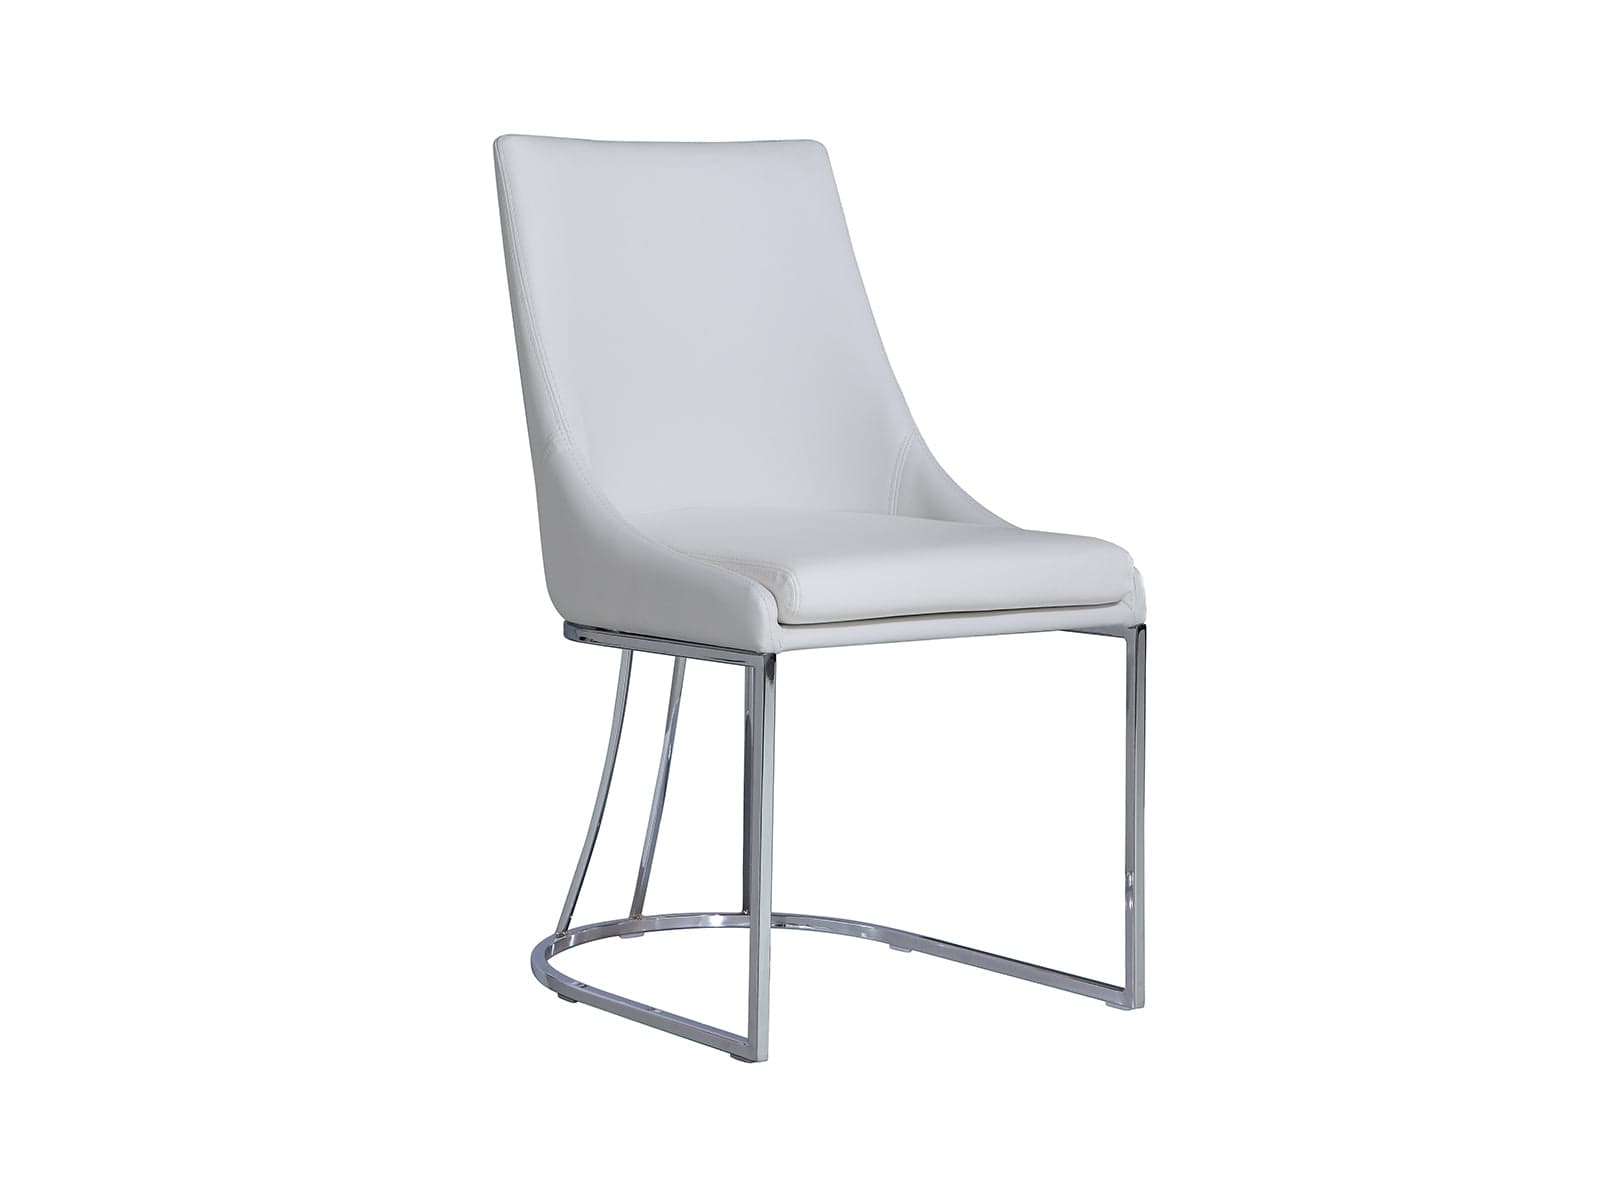 Casabianca Creek Dining Chair - White Leather